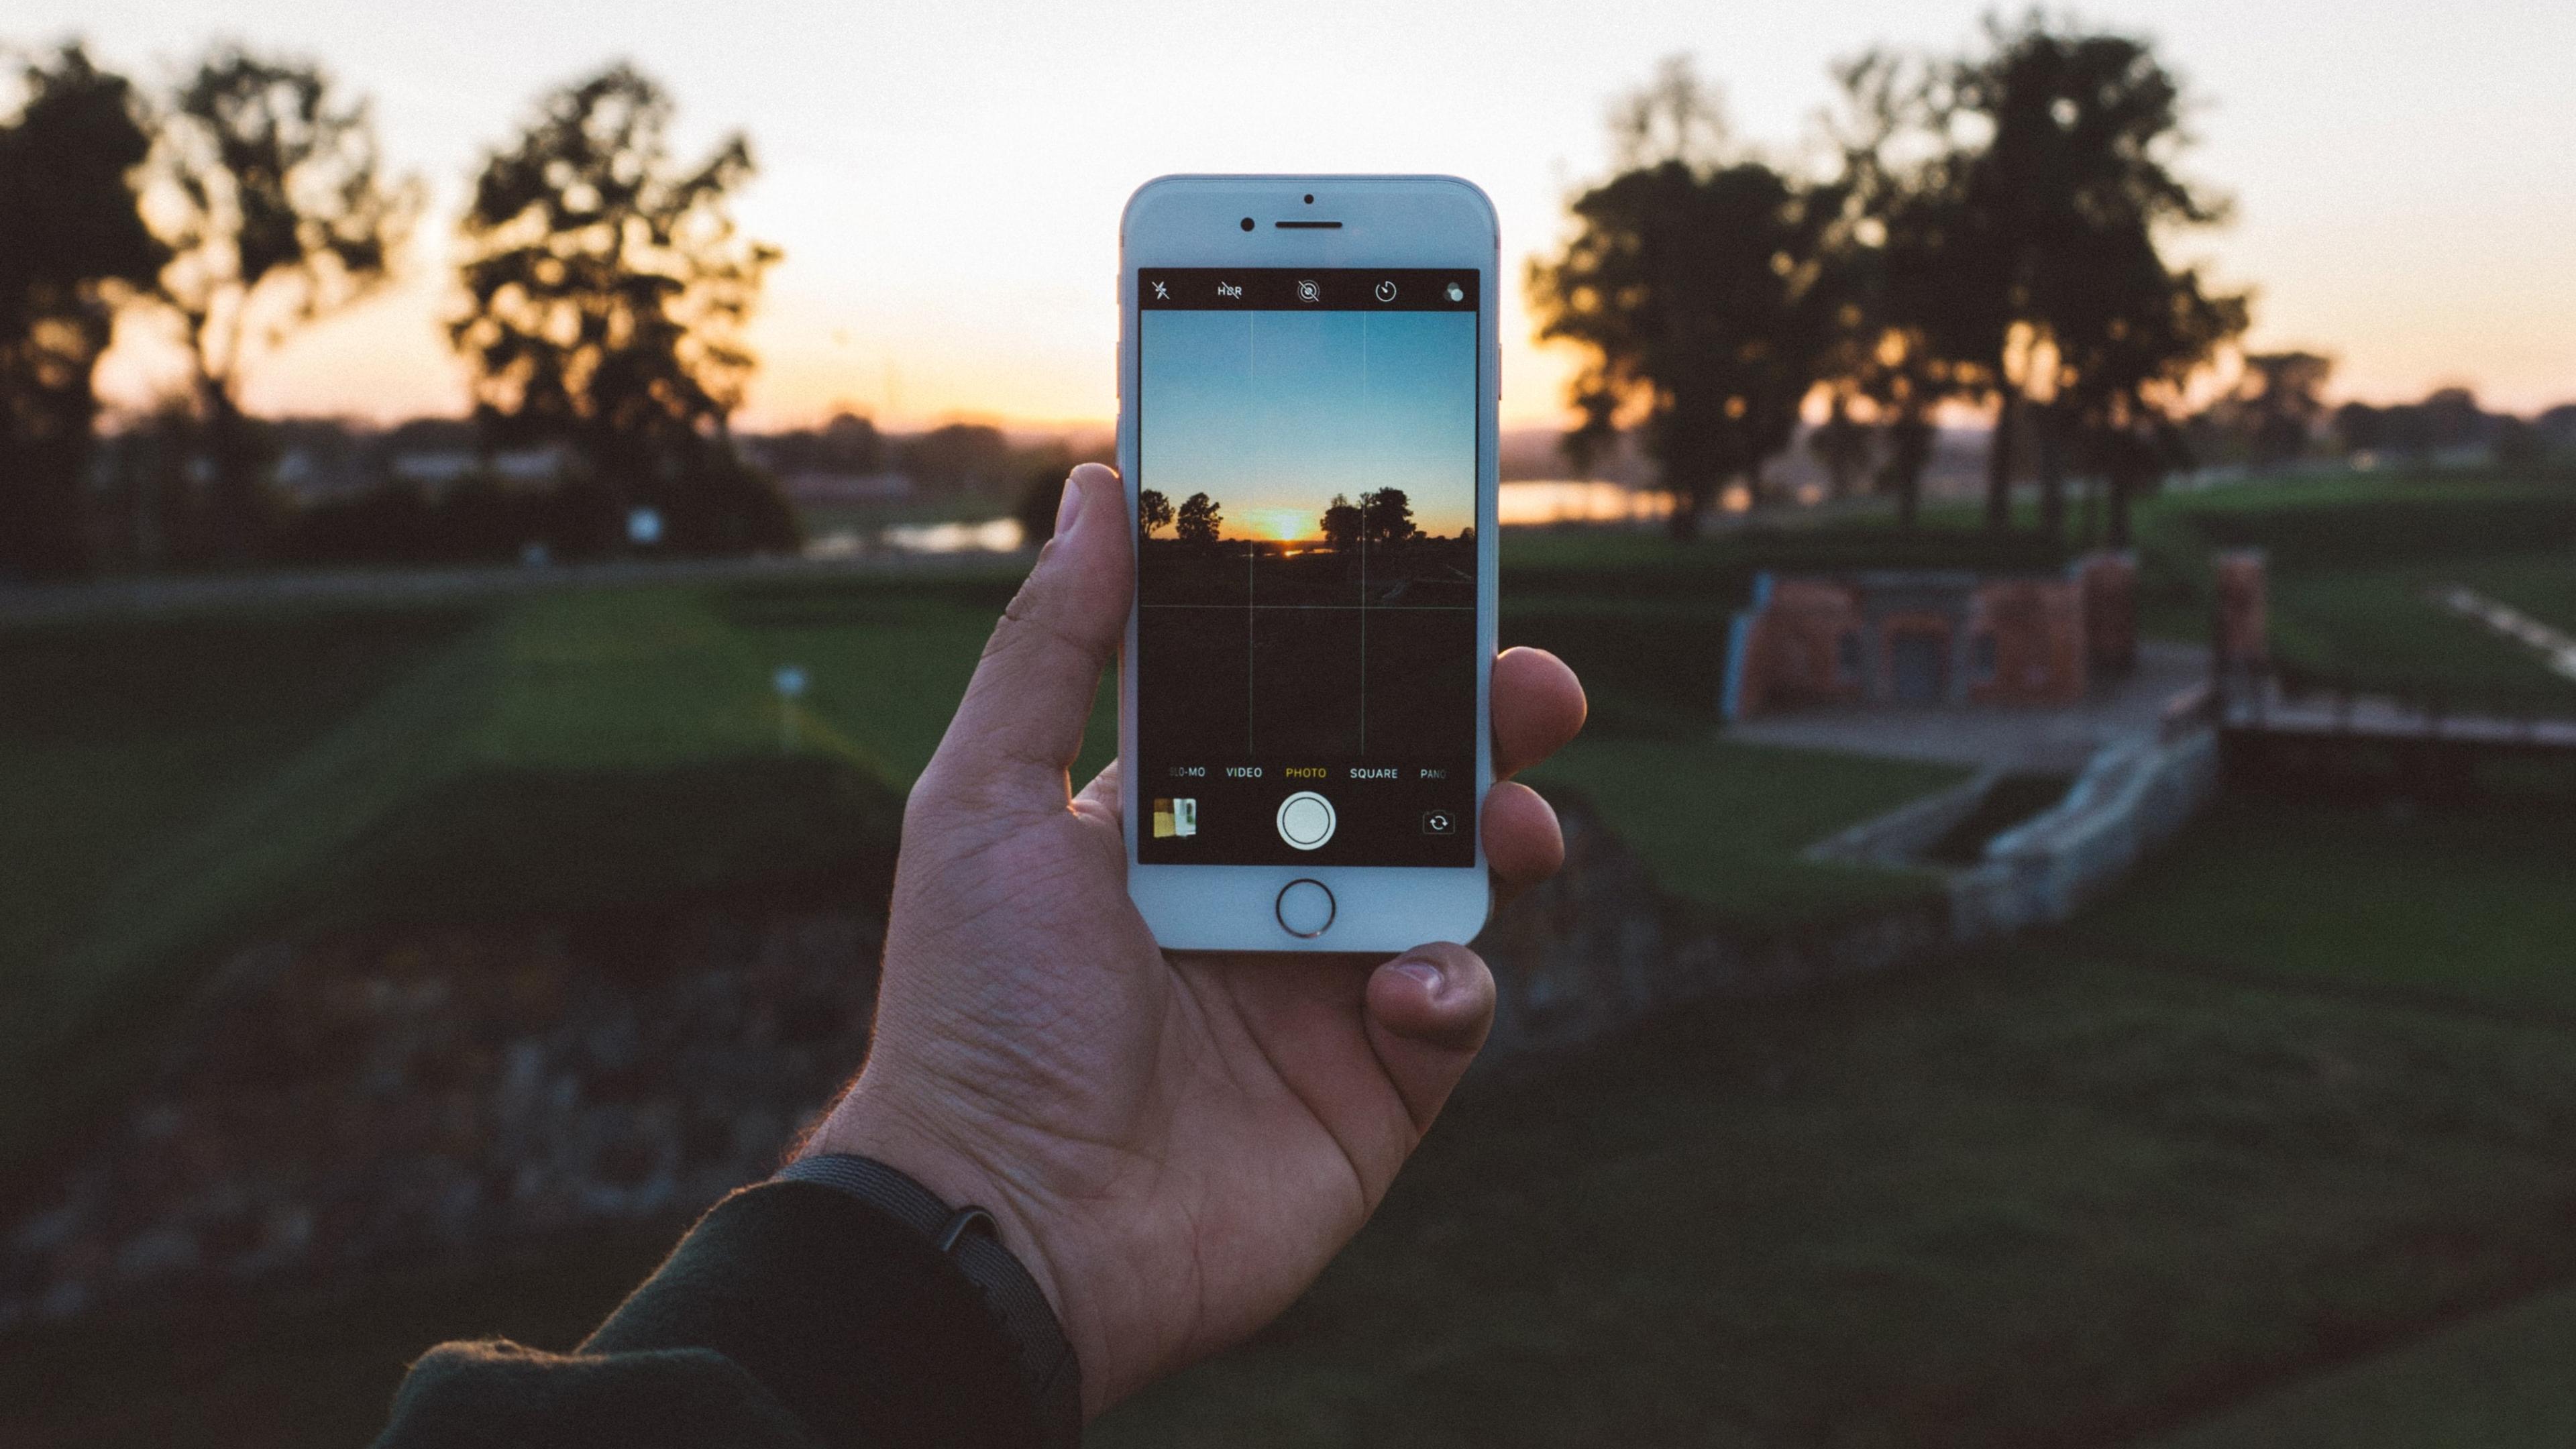 Hand holding a phone taking a photo of the sunset